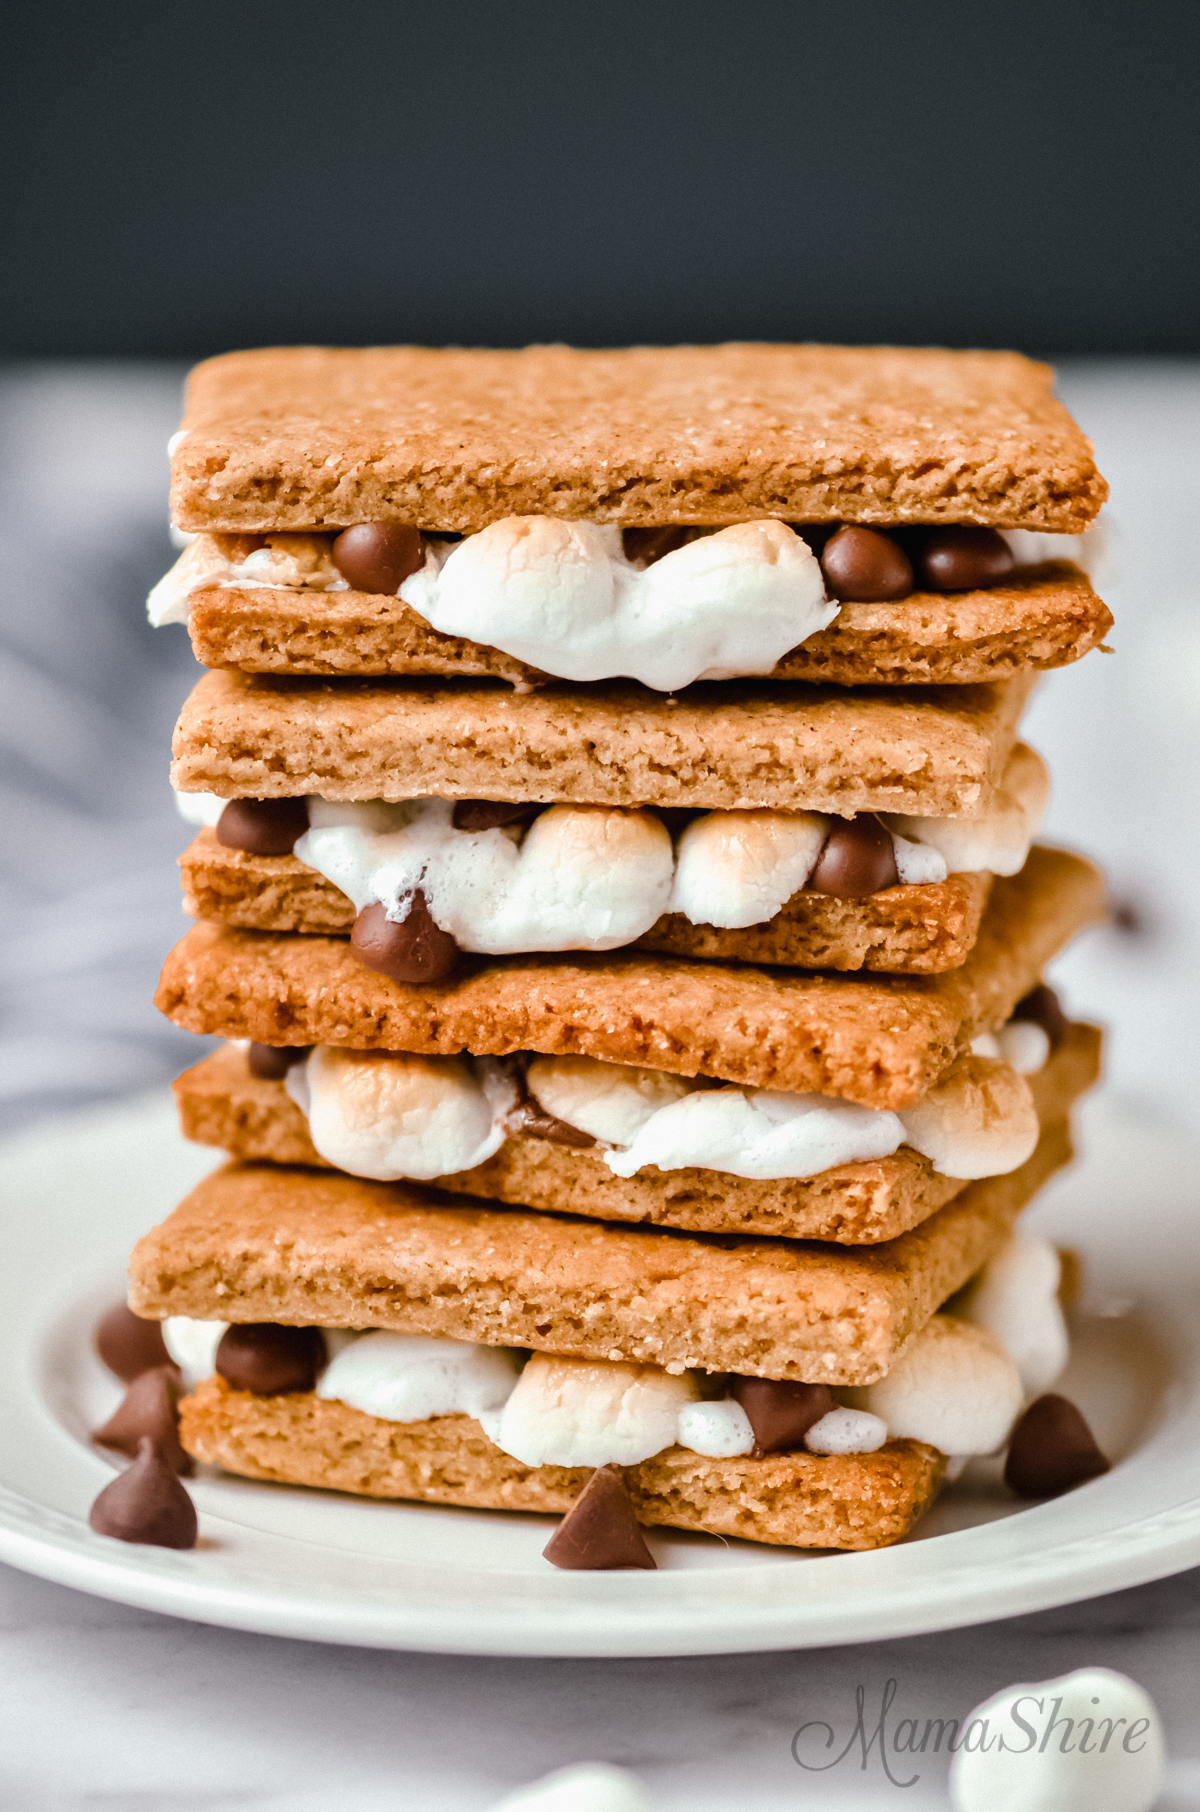 A stack of ooey, gooey gluten-free s'mores that were baked in the oven.